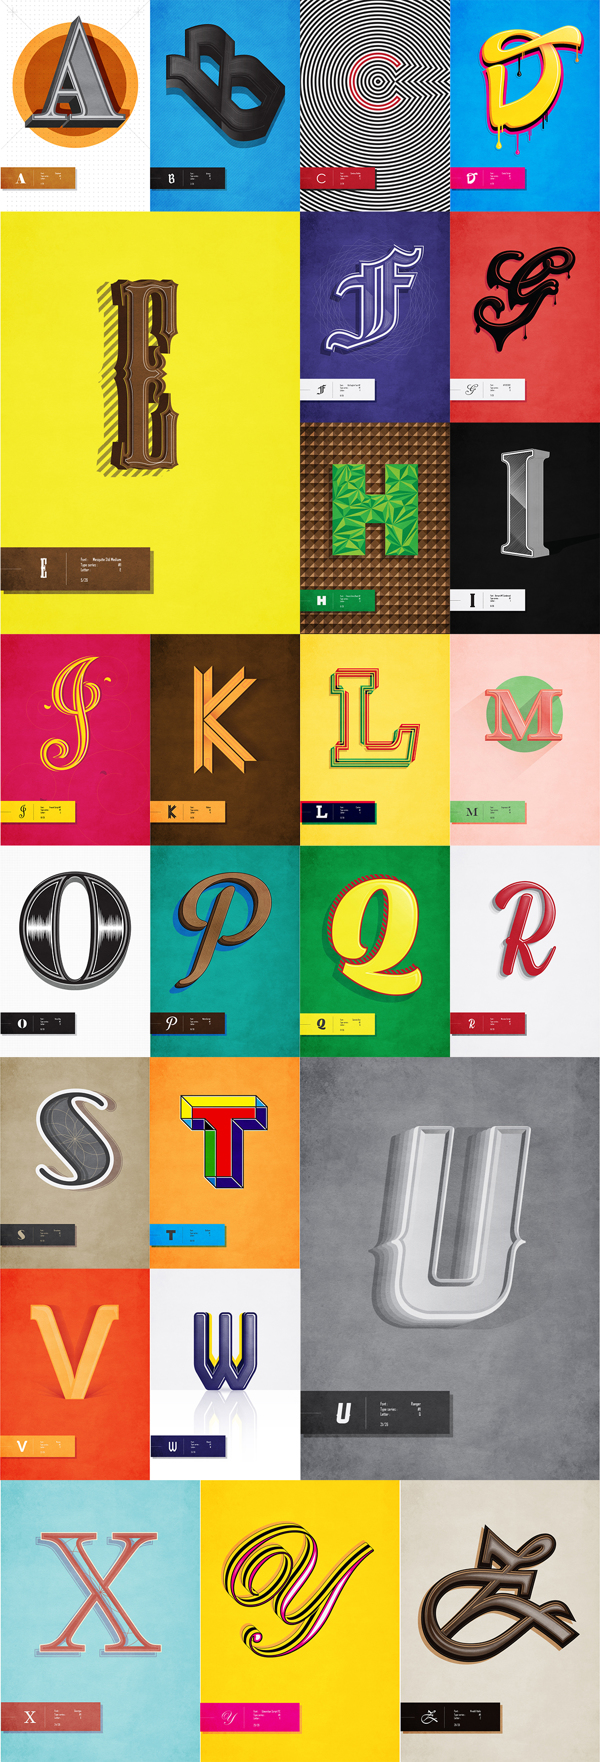 25 Remarkable Typography Design Created by Professional Designers - 18